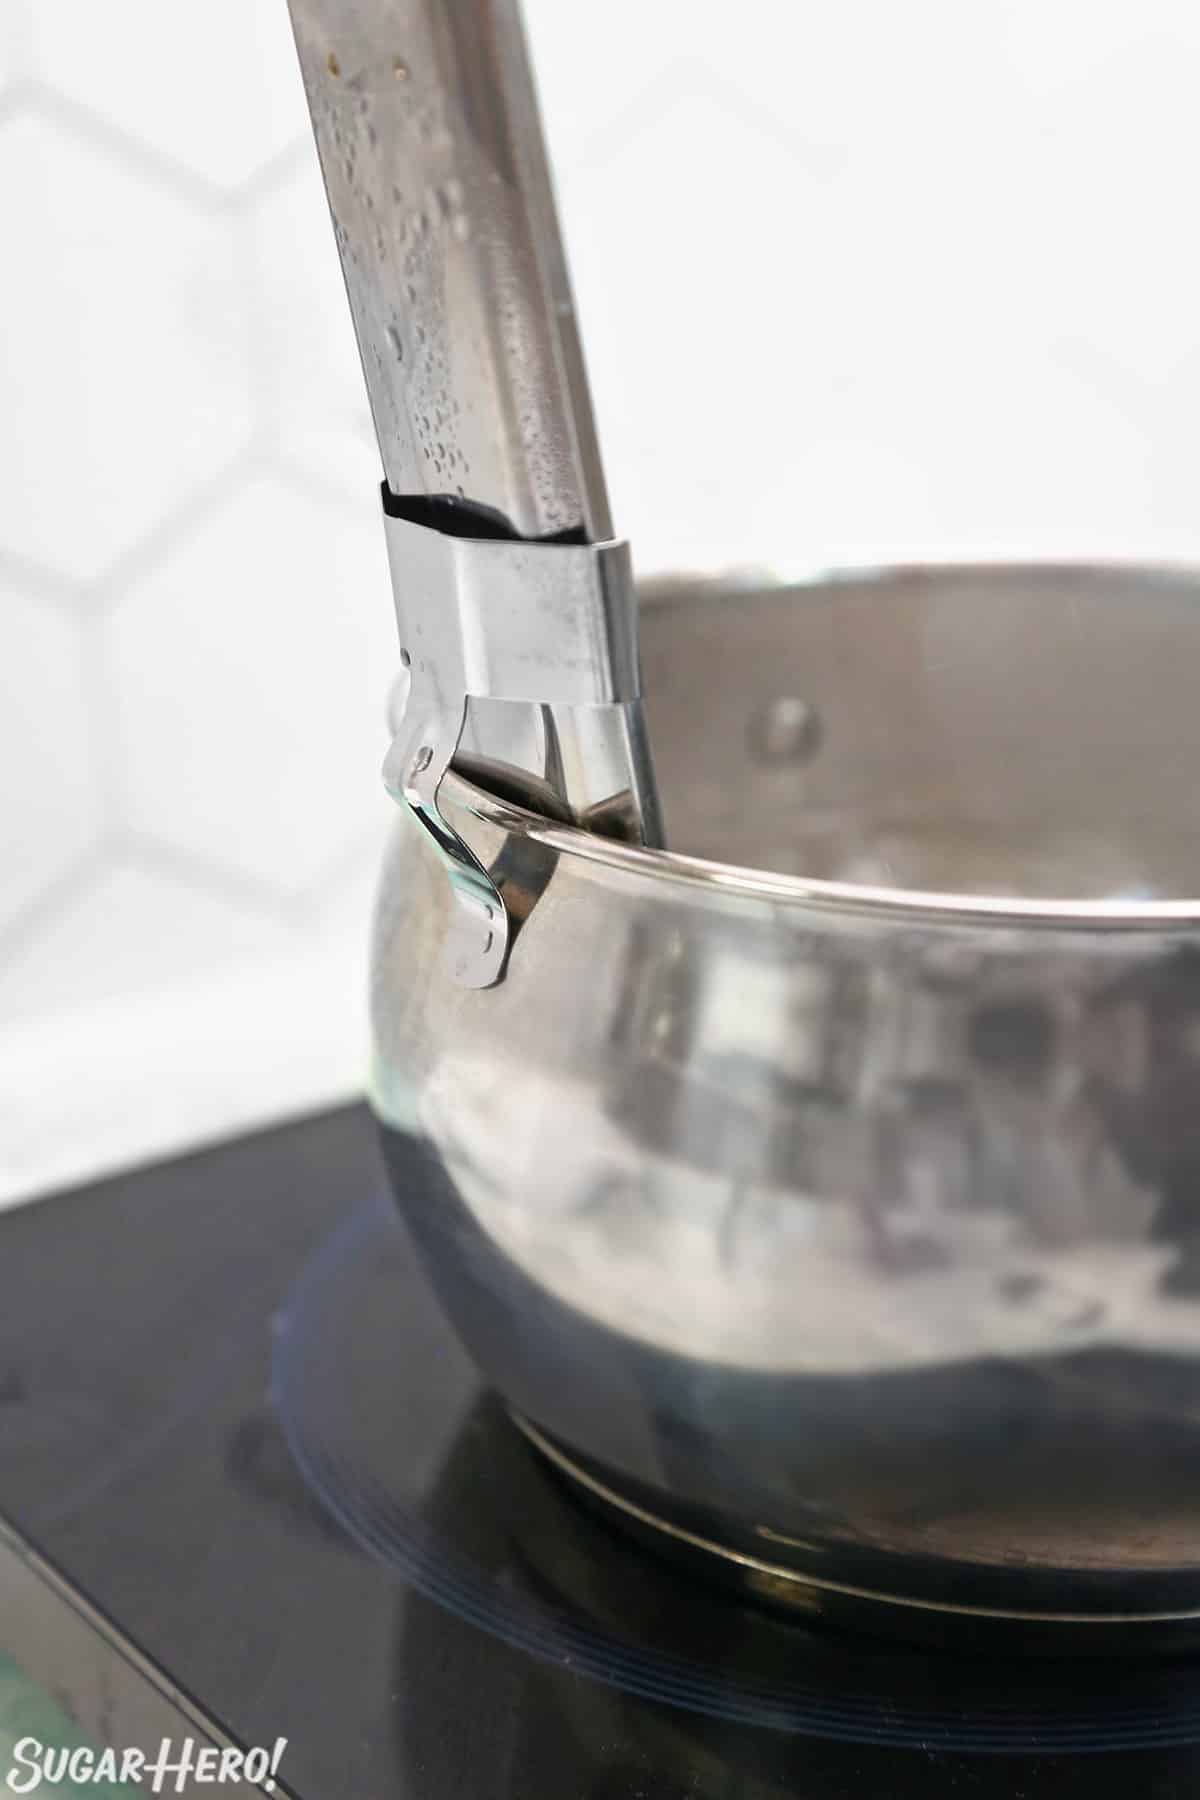 Side view of a metal candy thermometer clipped to the side of a metal pot.